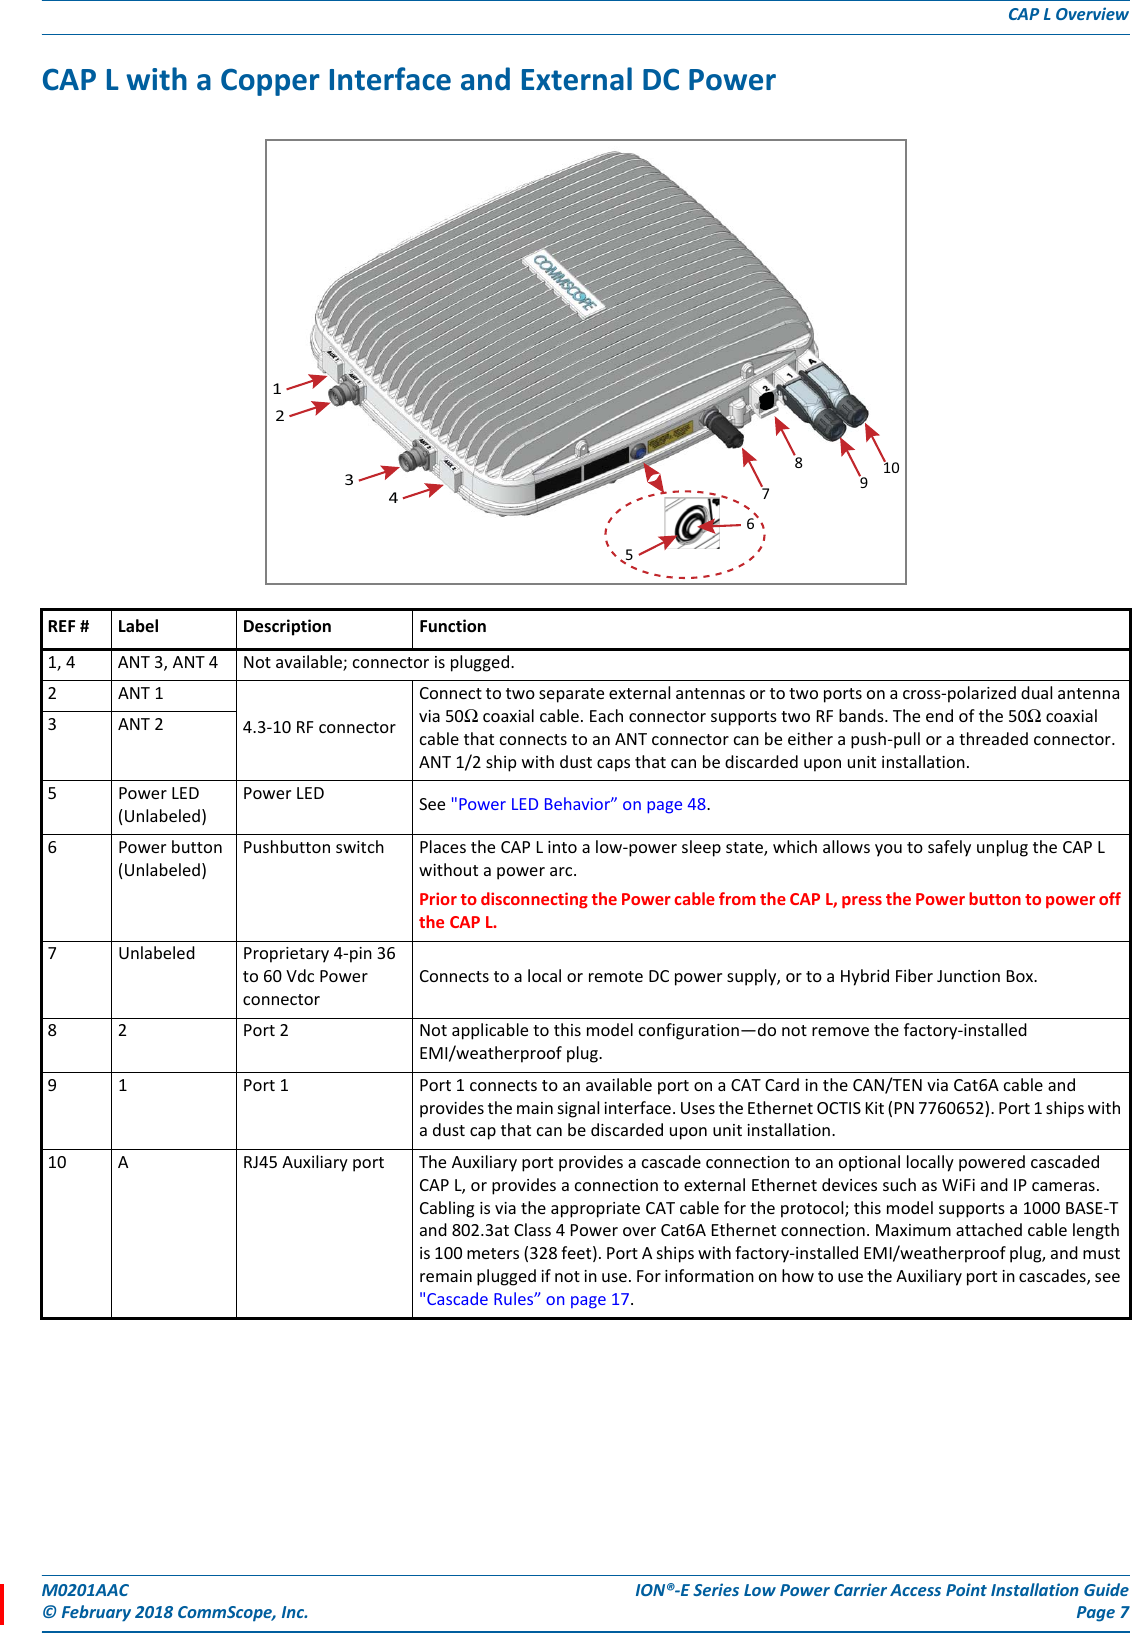 M0201AAC ION®-E Series Low Power Carrier Access Point Installation Guide© February 2018 CommScope, Inc. Page 7CAP L OverviewCAP L with a Copper Interface and External DC PowerREF # Label Description Function1, 4 ANT 3, ANT 4 Not available; connector is plugged.2ANT 1 4.3-10 RF connectorConnect to two separate external antennas or to two ports on a cross-polarized dual antenna via 50Ω coaxial cable. Each connector supports two RF bands. The end of the 50Ω coaxial cable that connects to an ANT connector can be either a push-pull or a threaded connector. ANT 1/2 ship with dust caps that can be discarded upon unit installation. 3ANT 25Power LED (Unlabeled)Power LED See &quot;Power LED Behavior” on page 48.6 Power button (Unlabeled)Pushbutton switch Places the CAP L into a low-power sleep state, which allows you to safely unplug the CAP L without a power arc. Prior to disconnecting the Power cable from the CAP L, press the Power button to power off the CAP L. 7 Unlabeled  Proprietary 4-pin 36 to 60 Vdc Power connectorConnects to a local or remote DC power supply, or to a Hybrid Fiber Junction Box. 8 2  Port 2 Not applicable to this model configuration—do not remove the factory-installed EMI/weatherproof plug.9 1  Port 1 Port 1 connects to an available port on a CAT Card in the CAN/TEN via Cat6A cable and provides the main signal interface. Uses the Ethernet OCTIS Kit (PN 7760652). Port 1 ships with a dust cap that can be discarded upon unit installation.10 A RJ45 Auxiliary port The Auxiliary port provides a cascade connection to an optional locally powered cascaded CAP L, or provides a connection to external Ethernet devices such as WiFi and IP cameras. Cabling is via the appropriate CAT cable for the protocol; this model supports a 1000 BASE-T and 802.3at Class 4 Power over Cat6A Ethernet connection. Maximum attached cable length is 100 meters (328 feet). Port A ships with factory-installed EMI/weatherproof plug, and must remain plugged if not in use. For information on how to use the Auxiliary port in cascades, see &quot;Cascade Rules” on page 17.12347891056